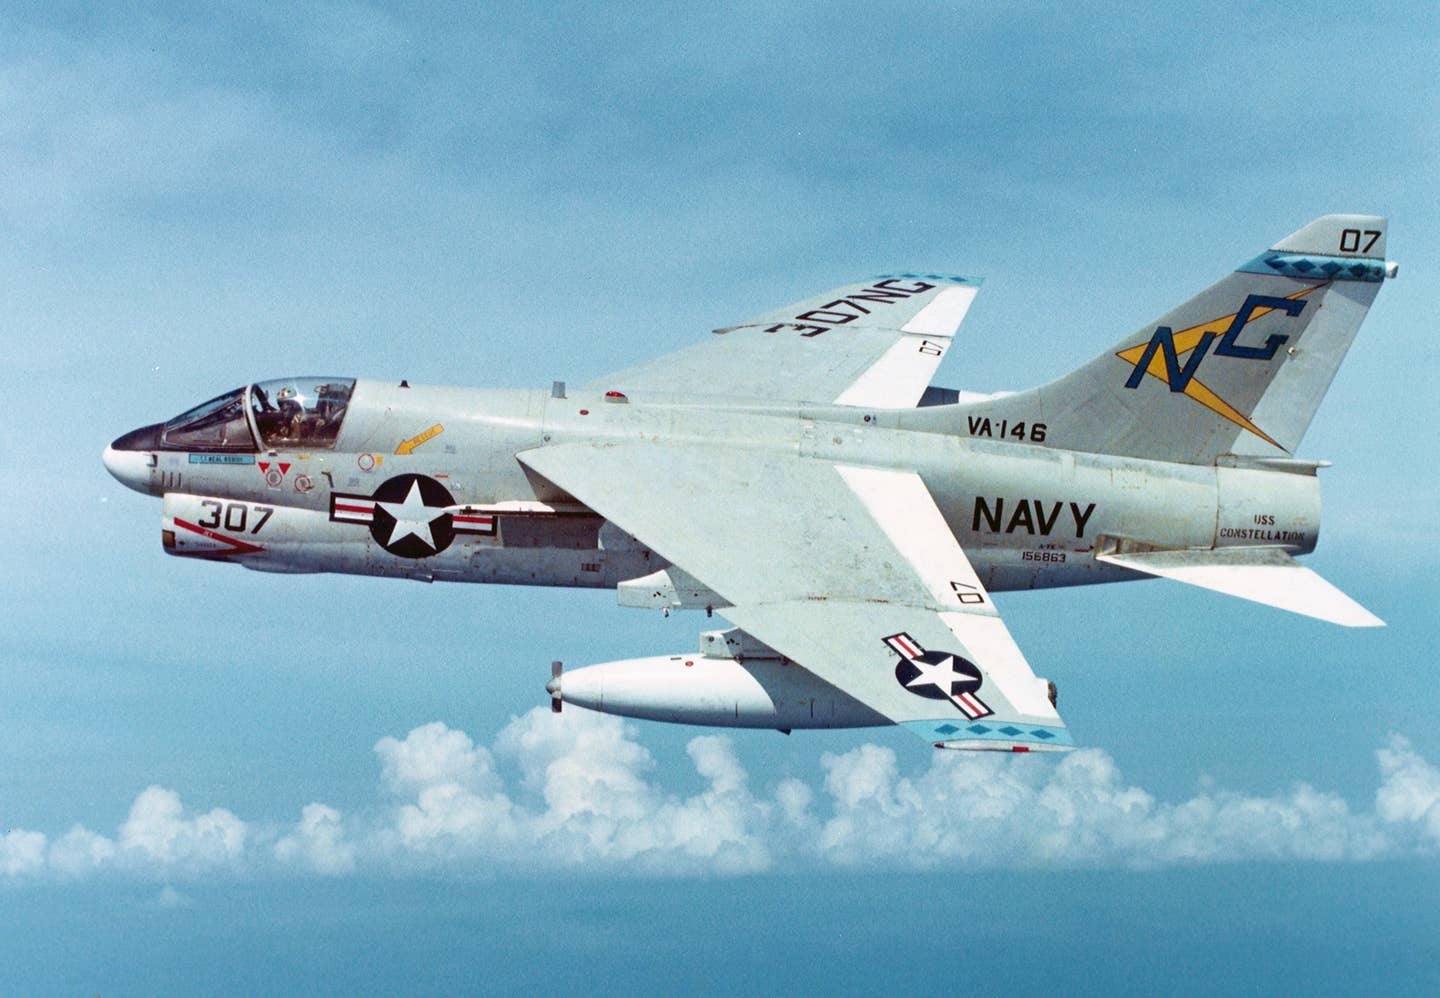 a-7 pirate-themed Navy planes